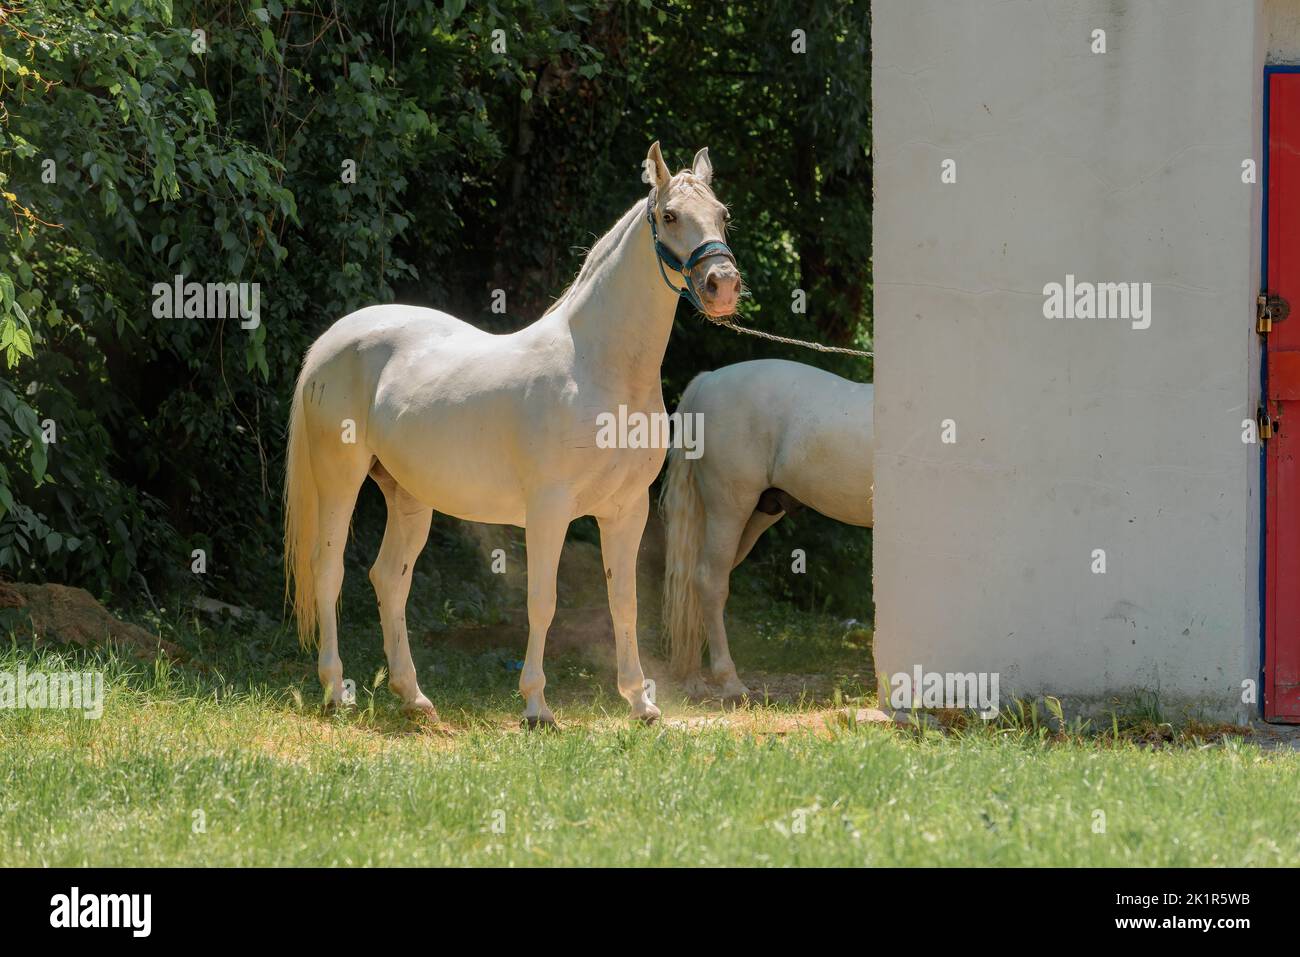 Two white horses on the farm, copy space included Stock Photo